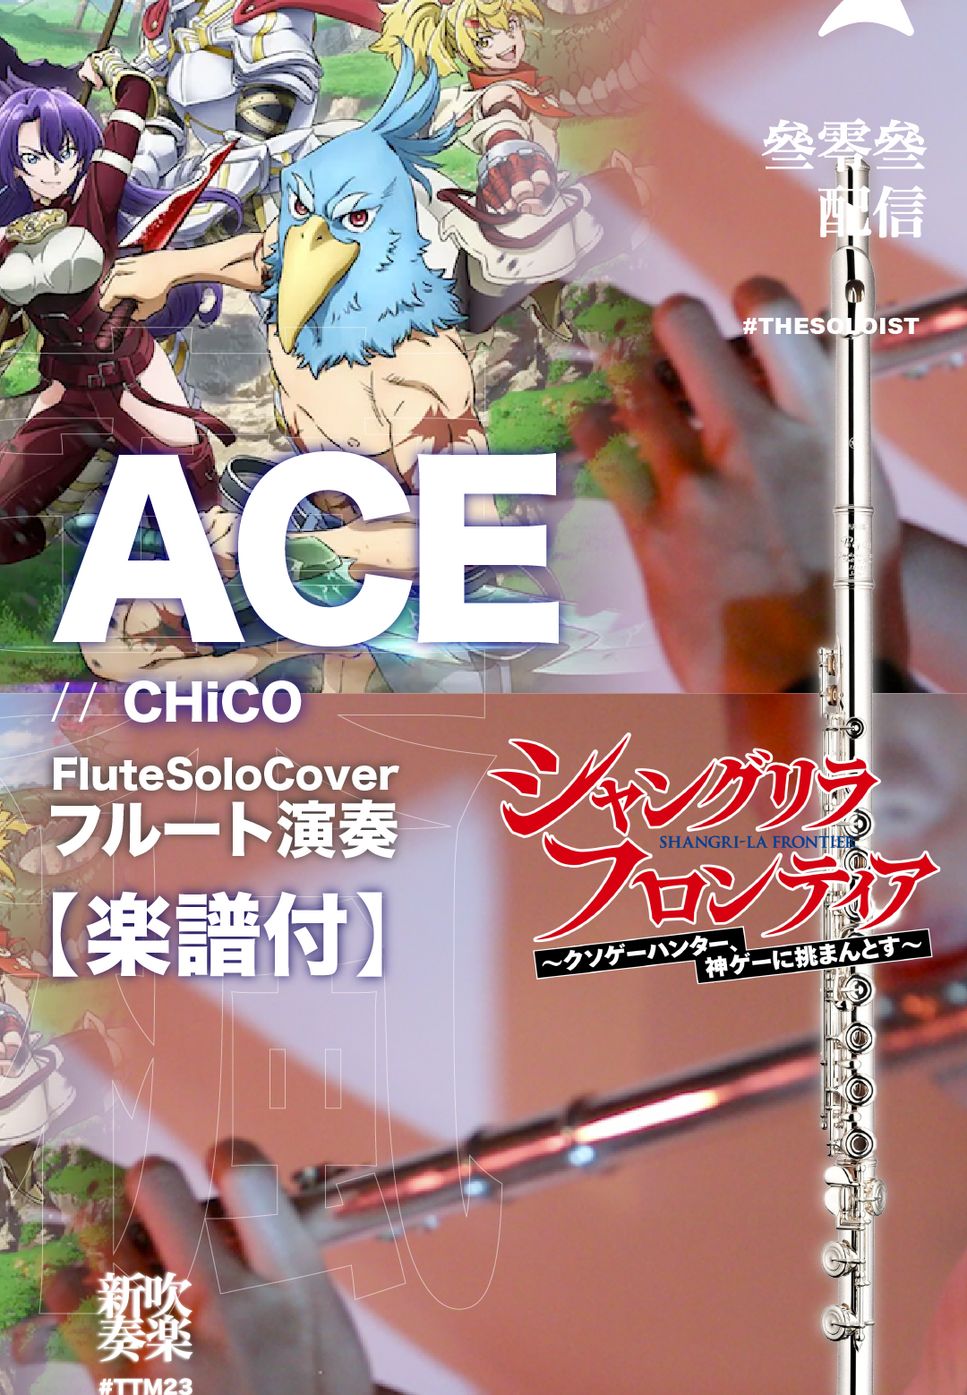 Chico - ACE (C/ Bb/ F/ Eb Solo Sheet Music) by FungYip